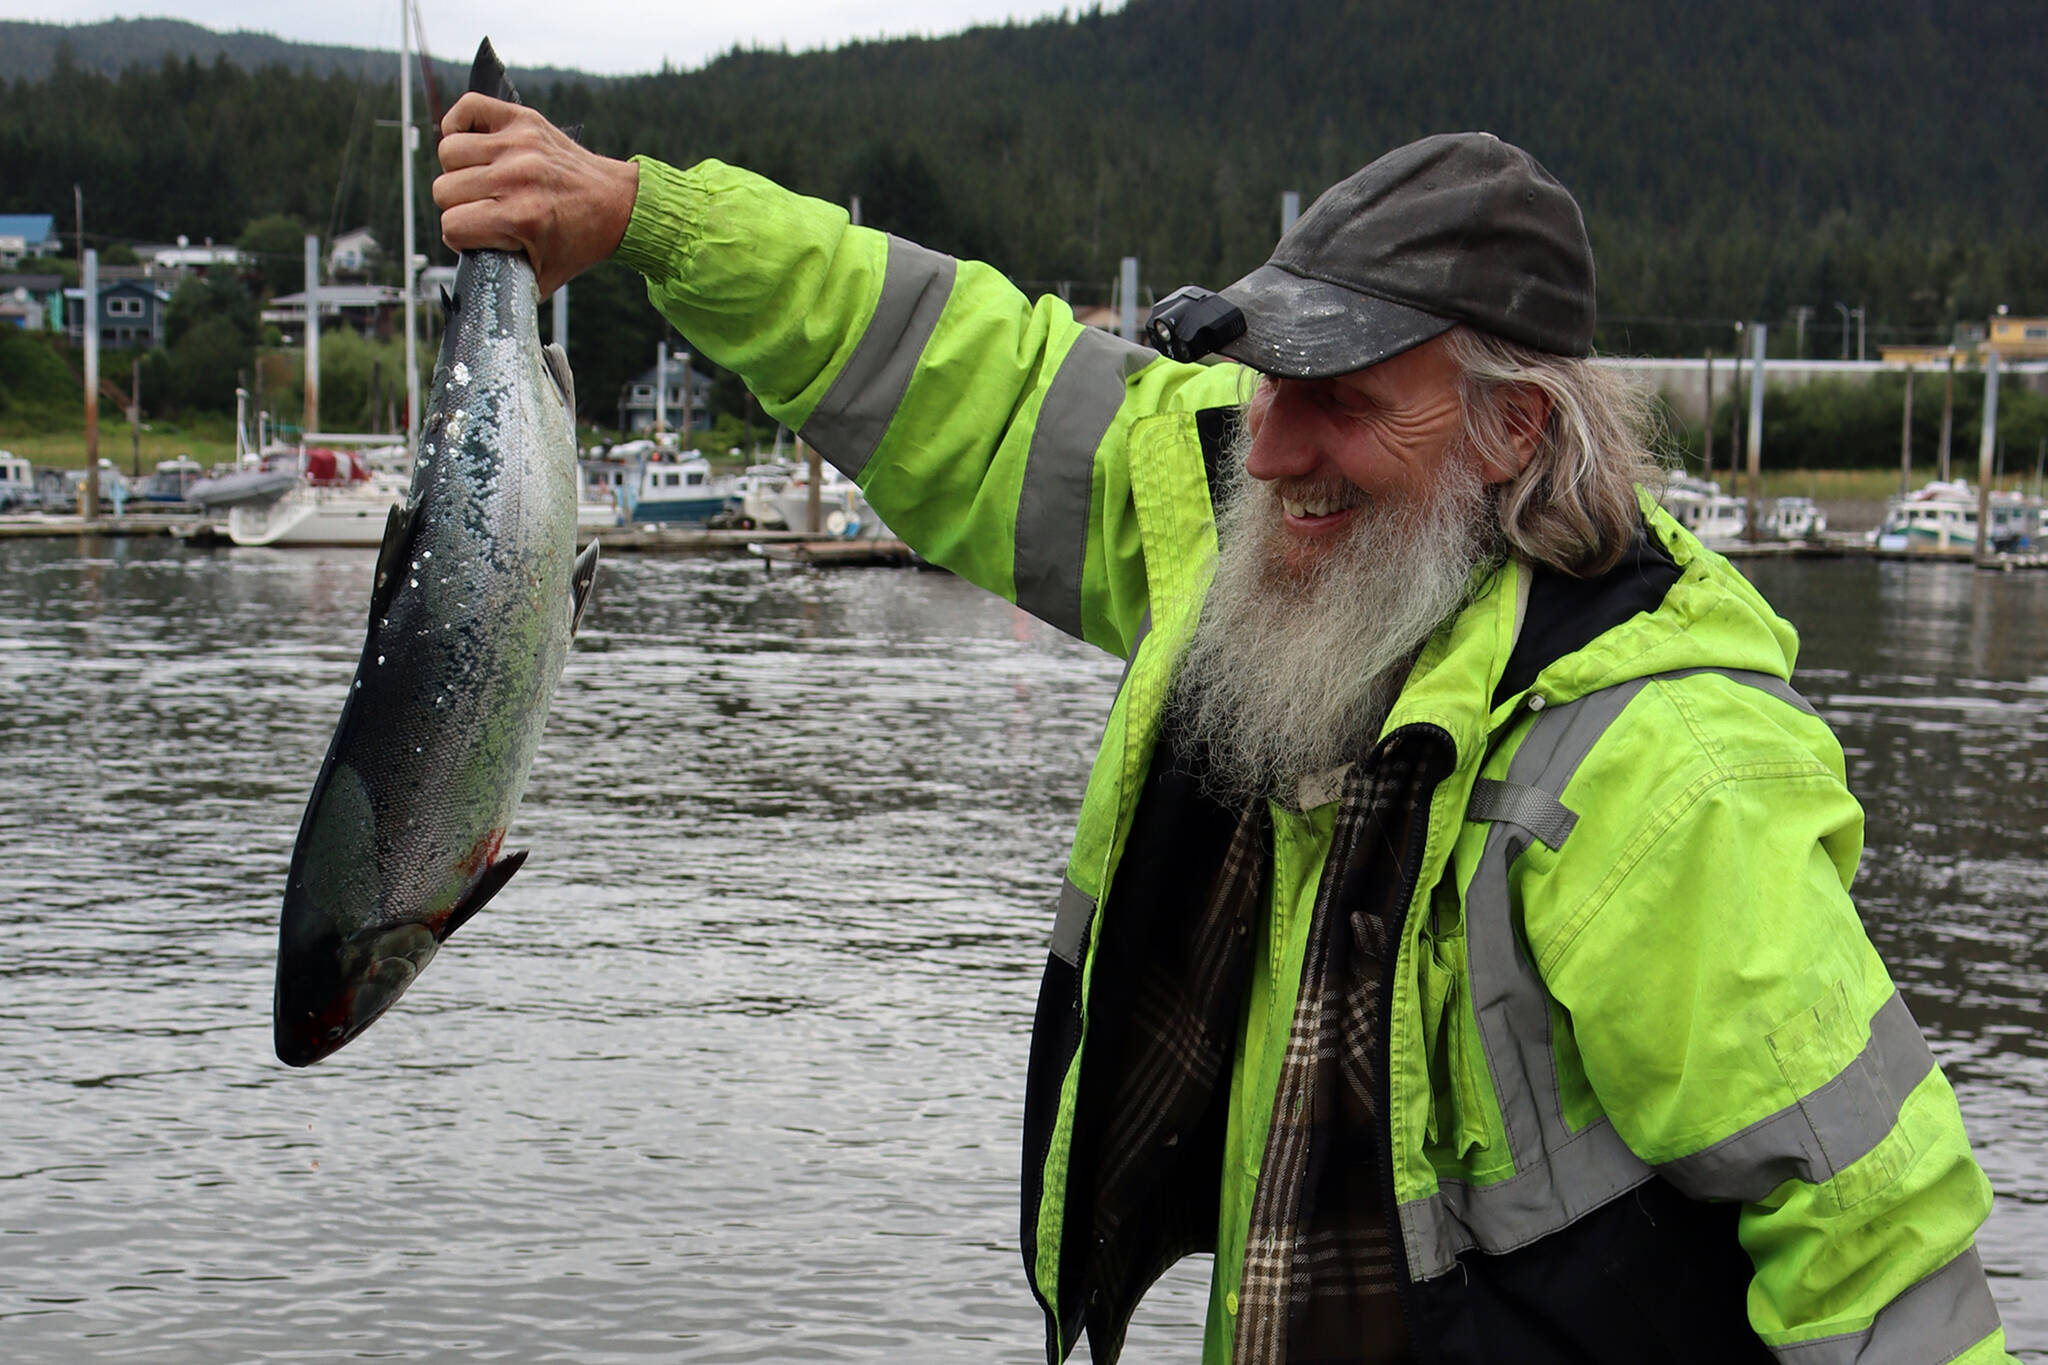 Eric Kirchner drops off one of several salmon during the 75th Golden North Salmon Derby in 2021. (Ben Hohenstatt / Juneau Empire)